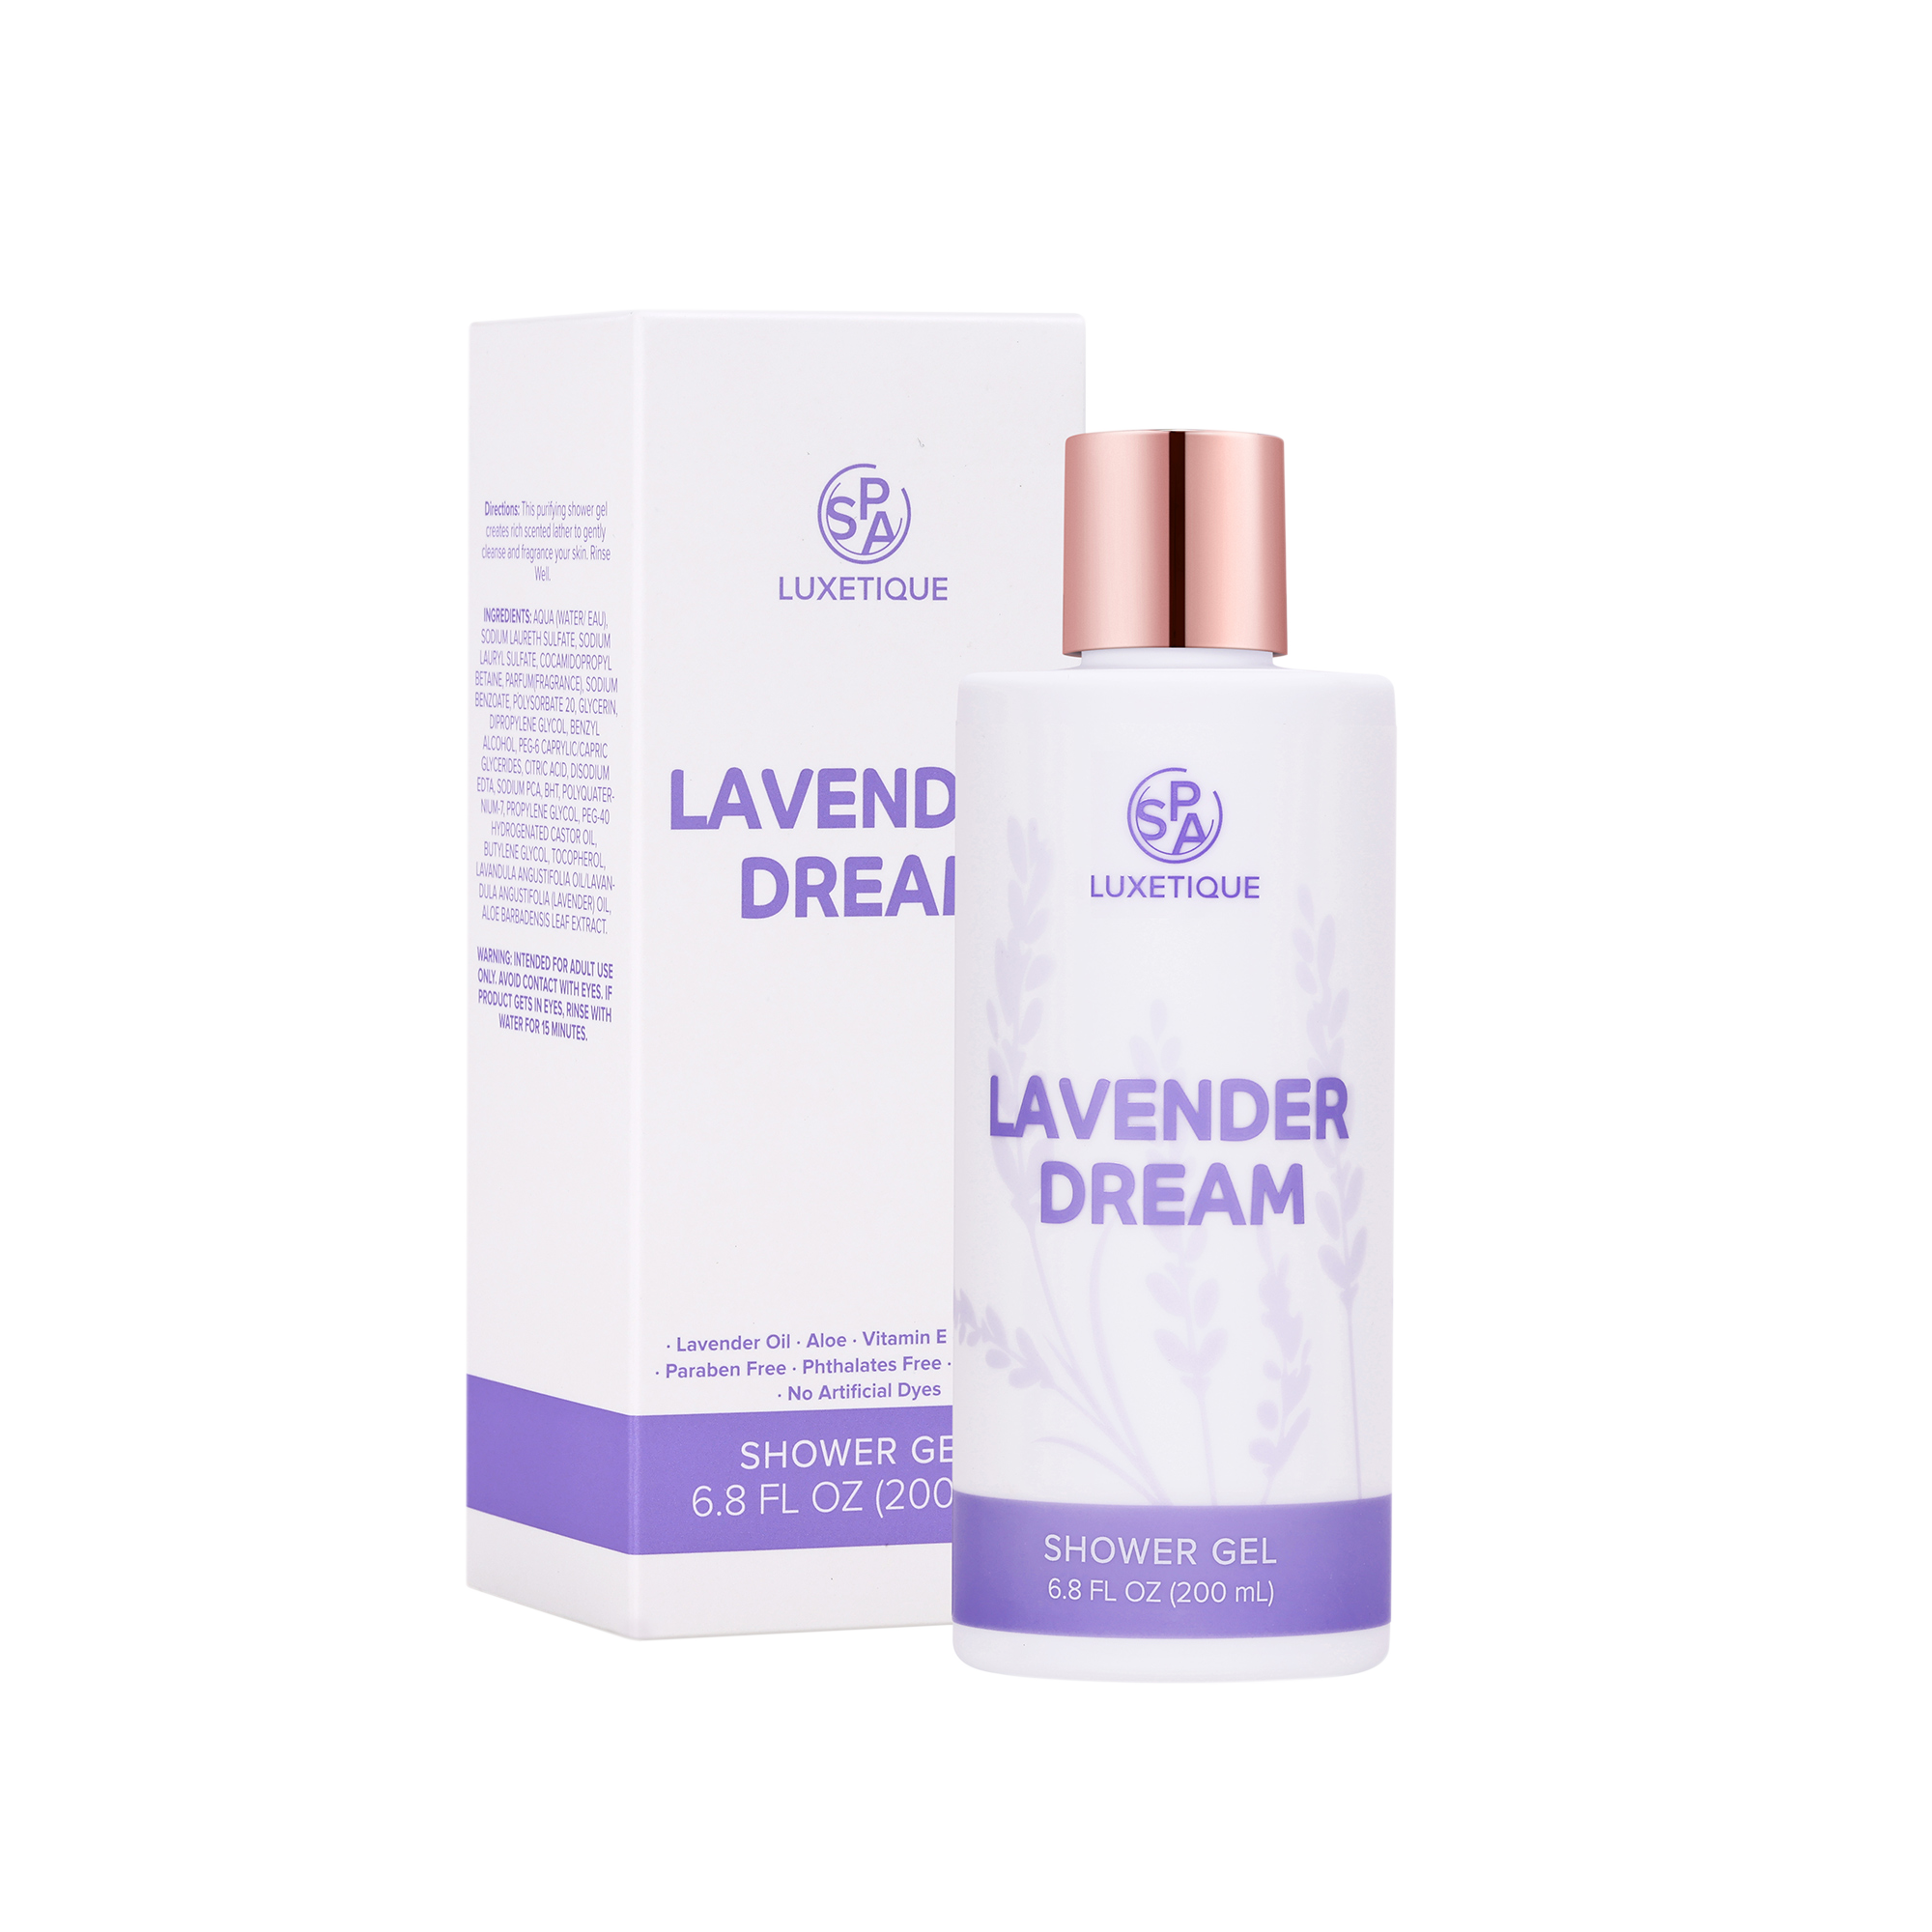 Lavender Lavender Dream Shower Gel. The tranquil, soothing properties of lavender make it ideal for your nightly shower as it promotes a sense of relaxation and peace right before you drift off to sleep. Watch your daily stressors wash down the drain when you use this shower gel. 